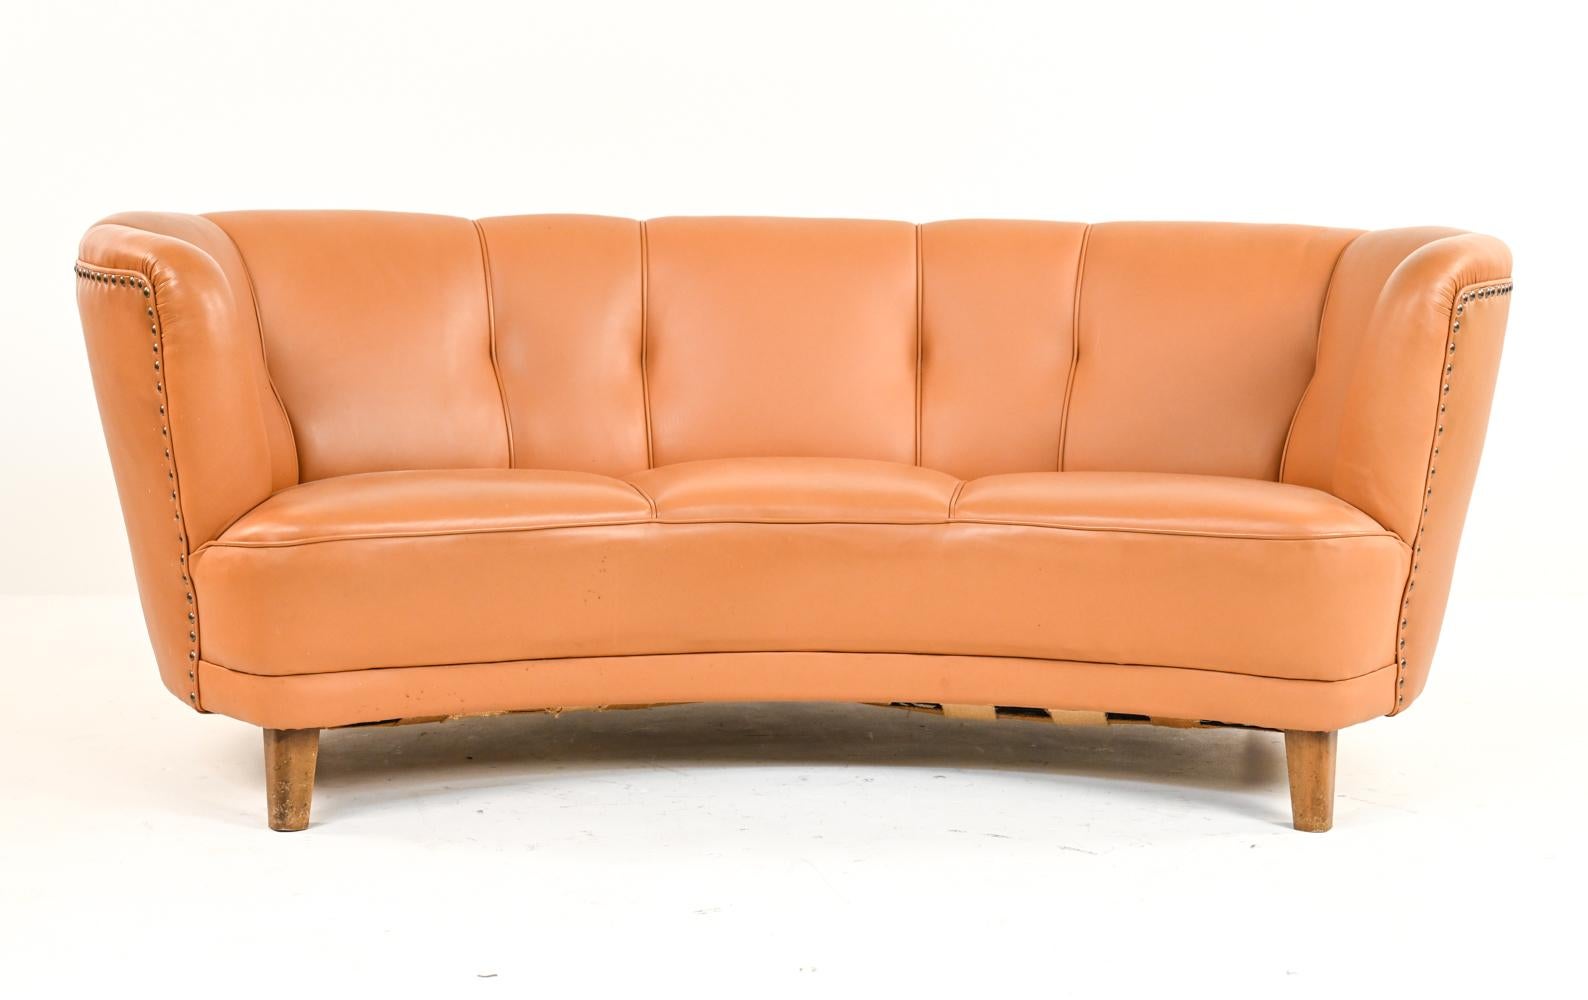 A handsome Danish Art Deco banana sofa in the manner of Viggo Boesen and Flemming Lassen's iconic designs. Featuring warm orange-toned leather upholstery with attractive nailhead trim detail, this banana sofa epitomizes the highly renowned